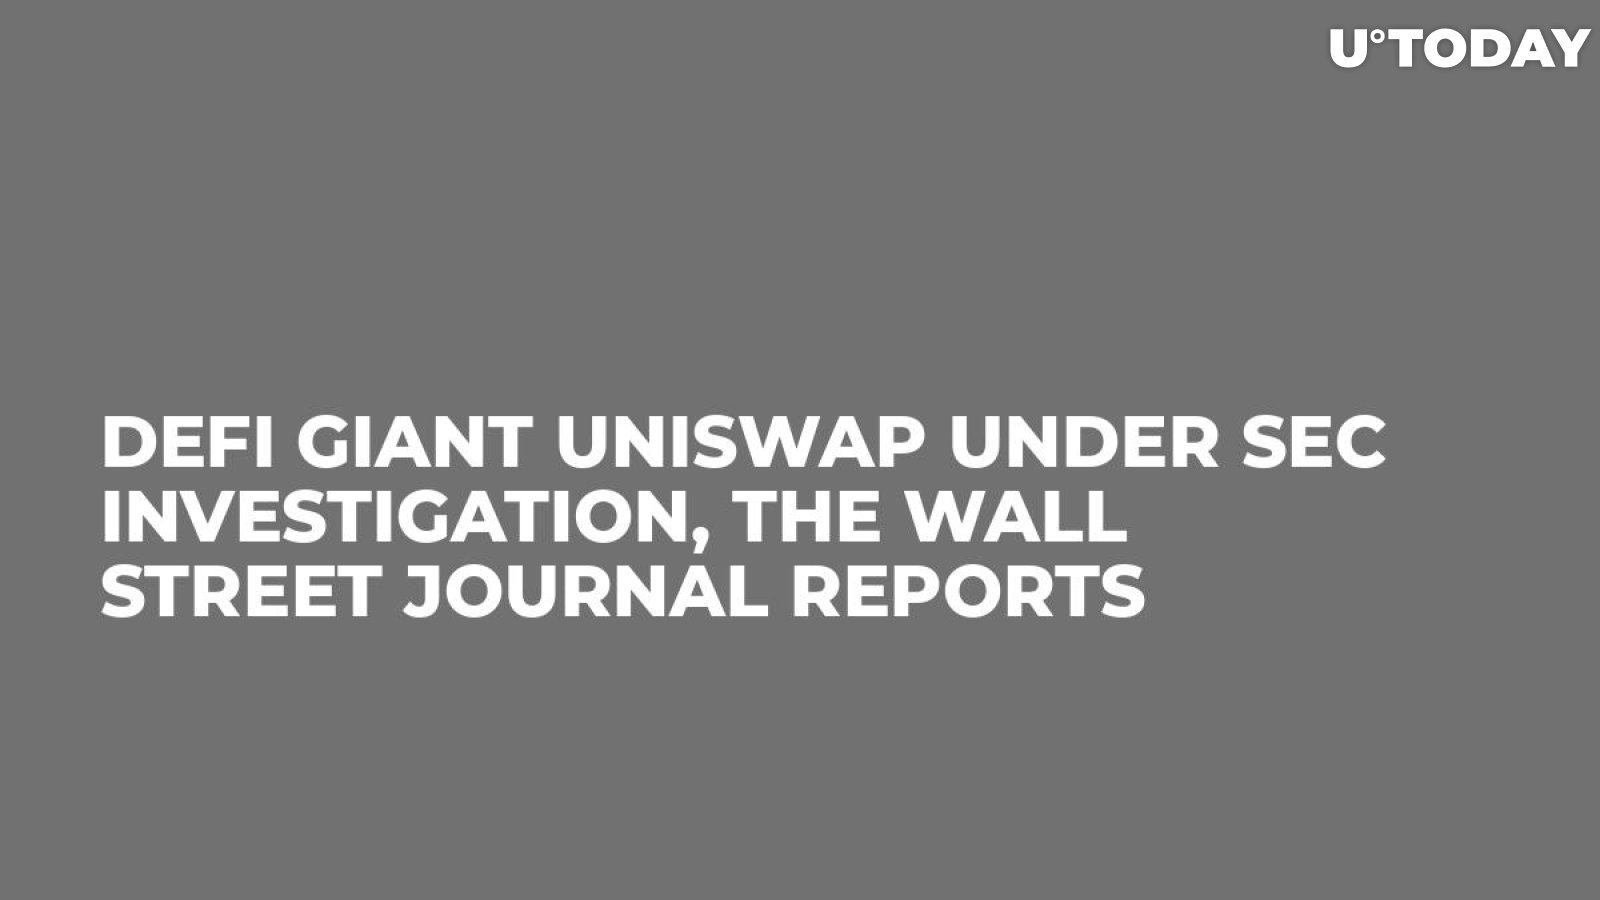 DeFi Giant Uniswap Under SEC Investigation, The Wall Street Journal Reports